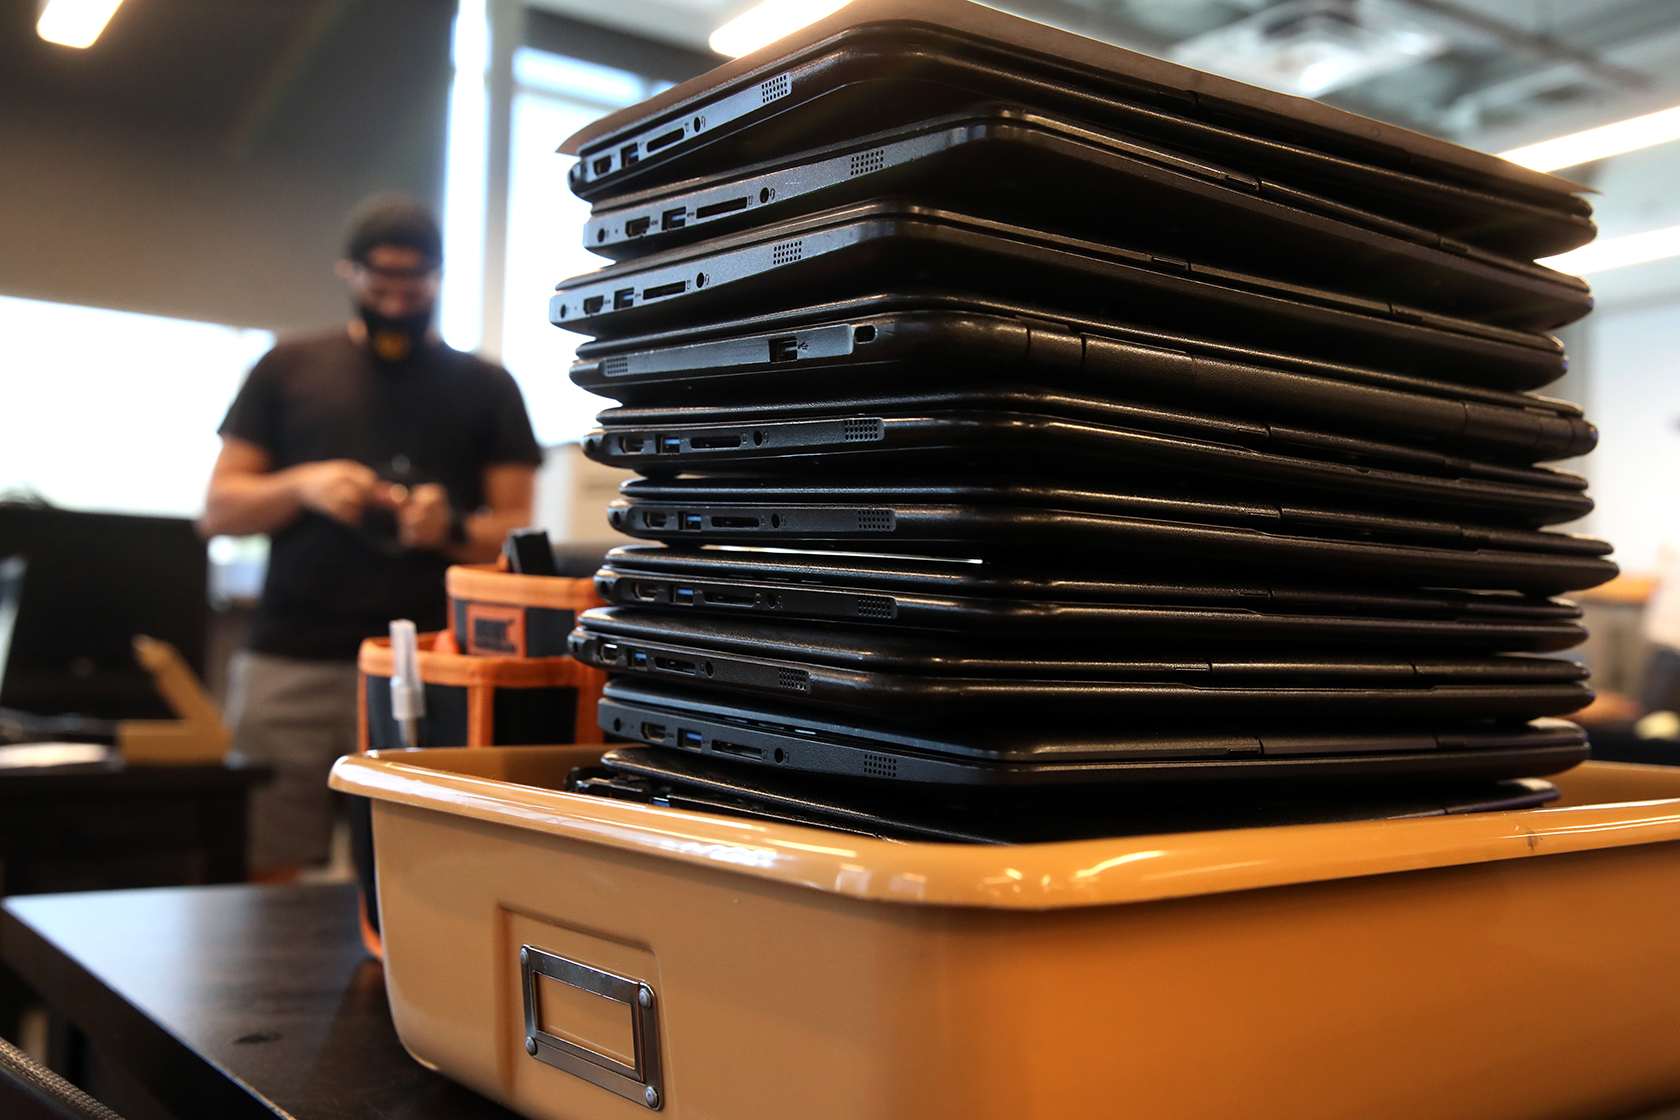 Close-up shot of a stack of black laptops in a peach-colored metal bin sitting on top of a black desk or table. Out of focus in the background, a man in a black t-shirt is pictured.